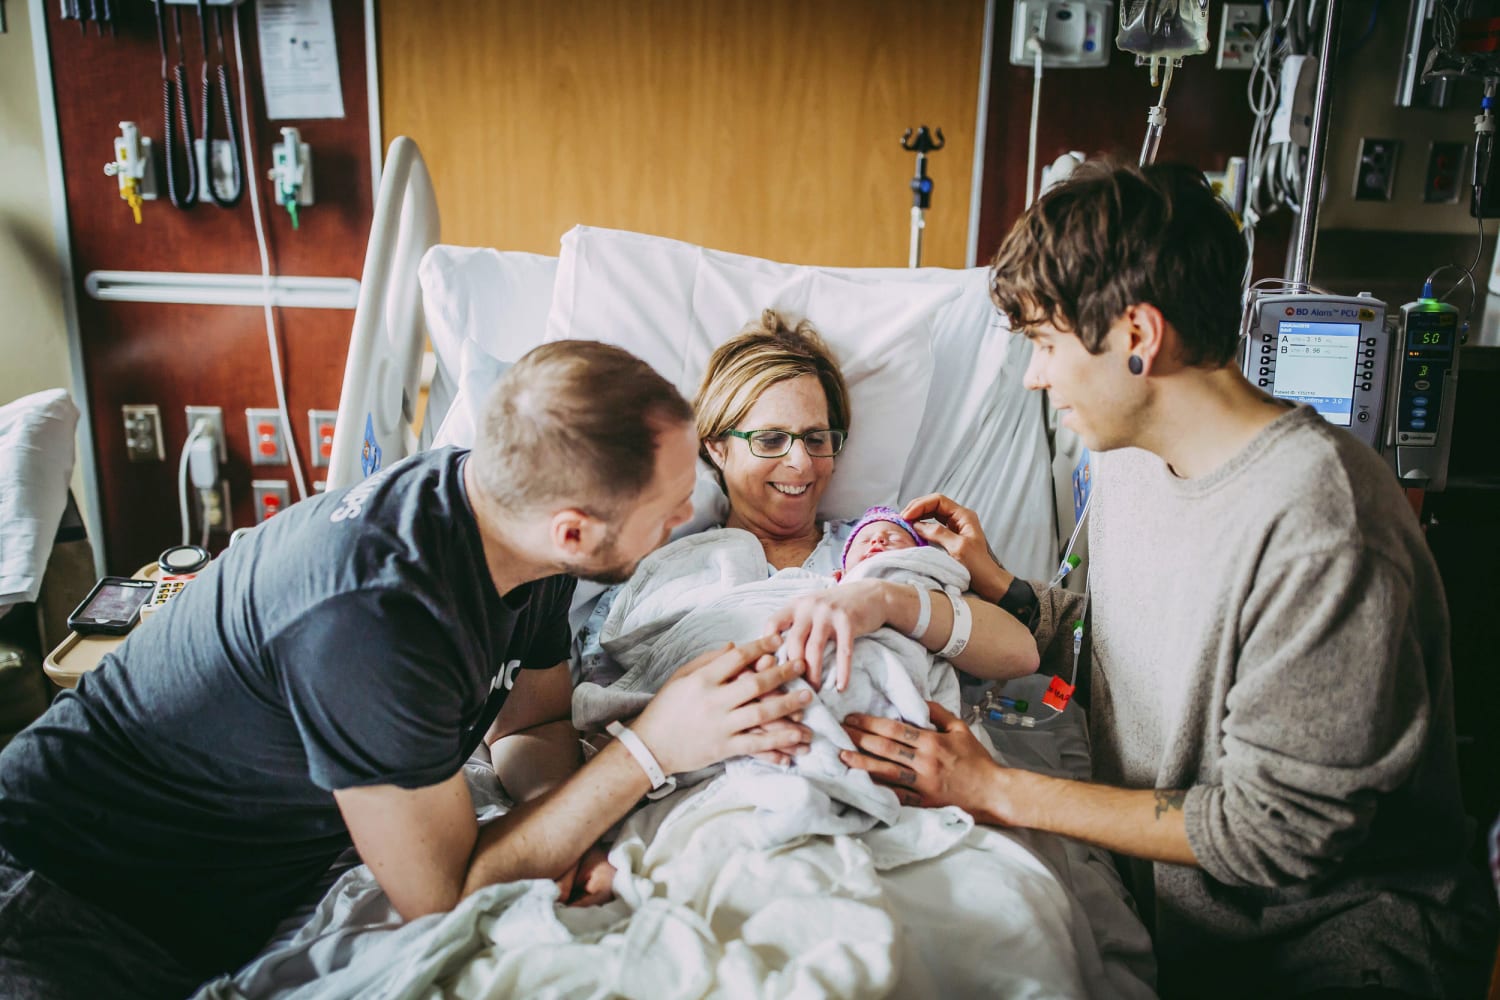 To help gay son, 61-year-old woman gives birth to own grandchild